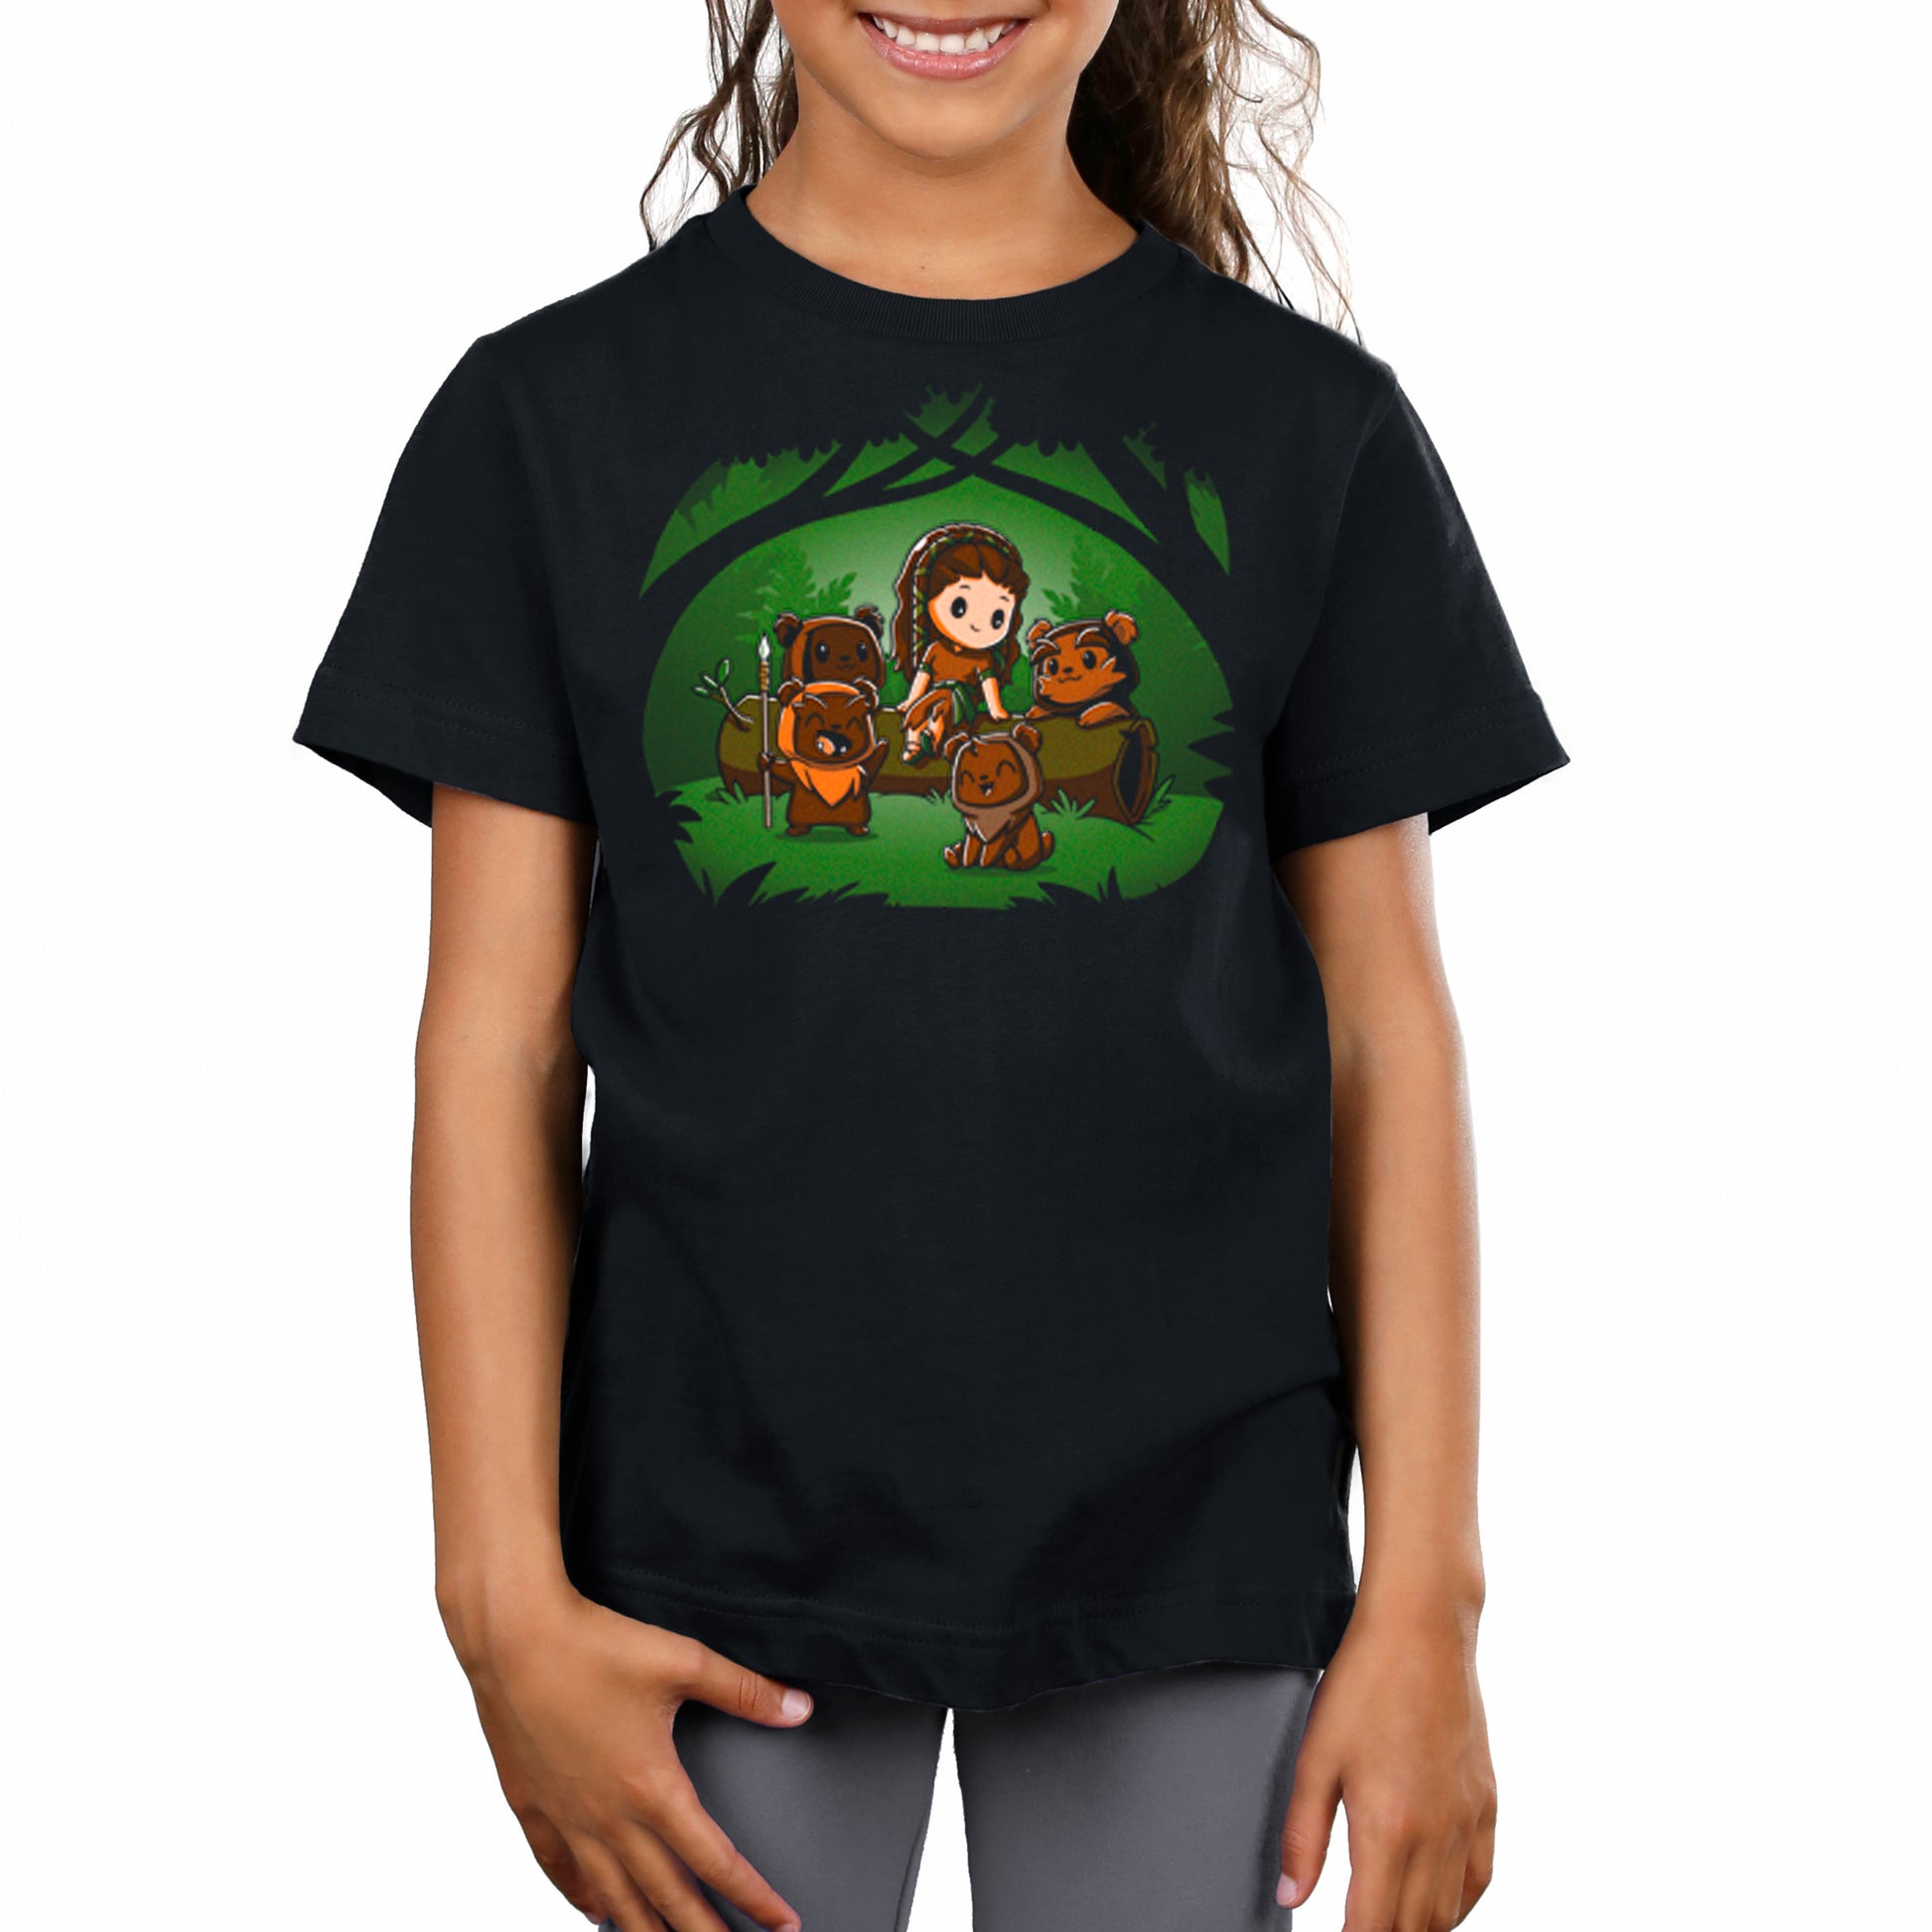 A girl wearing a Star Wars licensed black t-shirt with an image of Leia and Ewoks in a forest made from soft ringspun cotton.